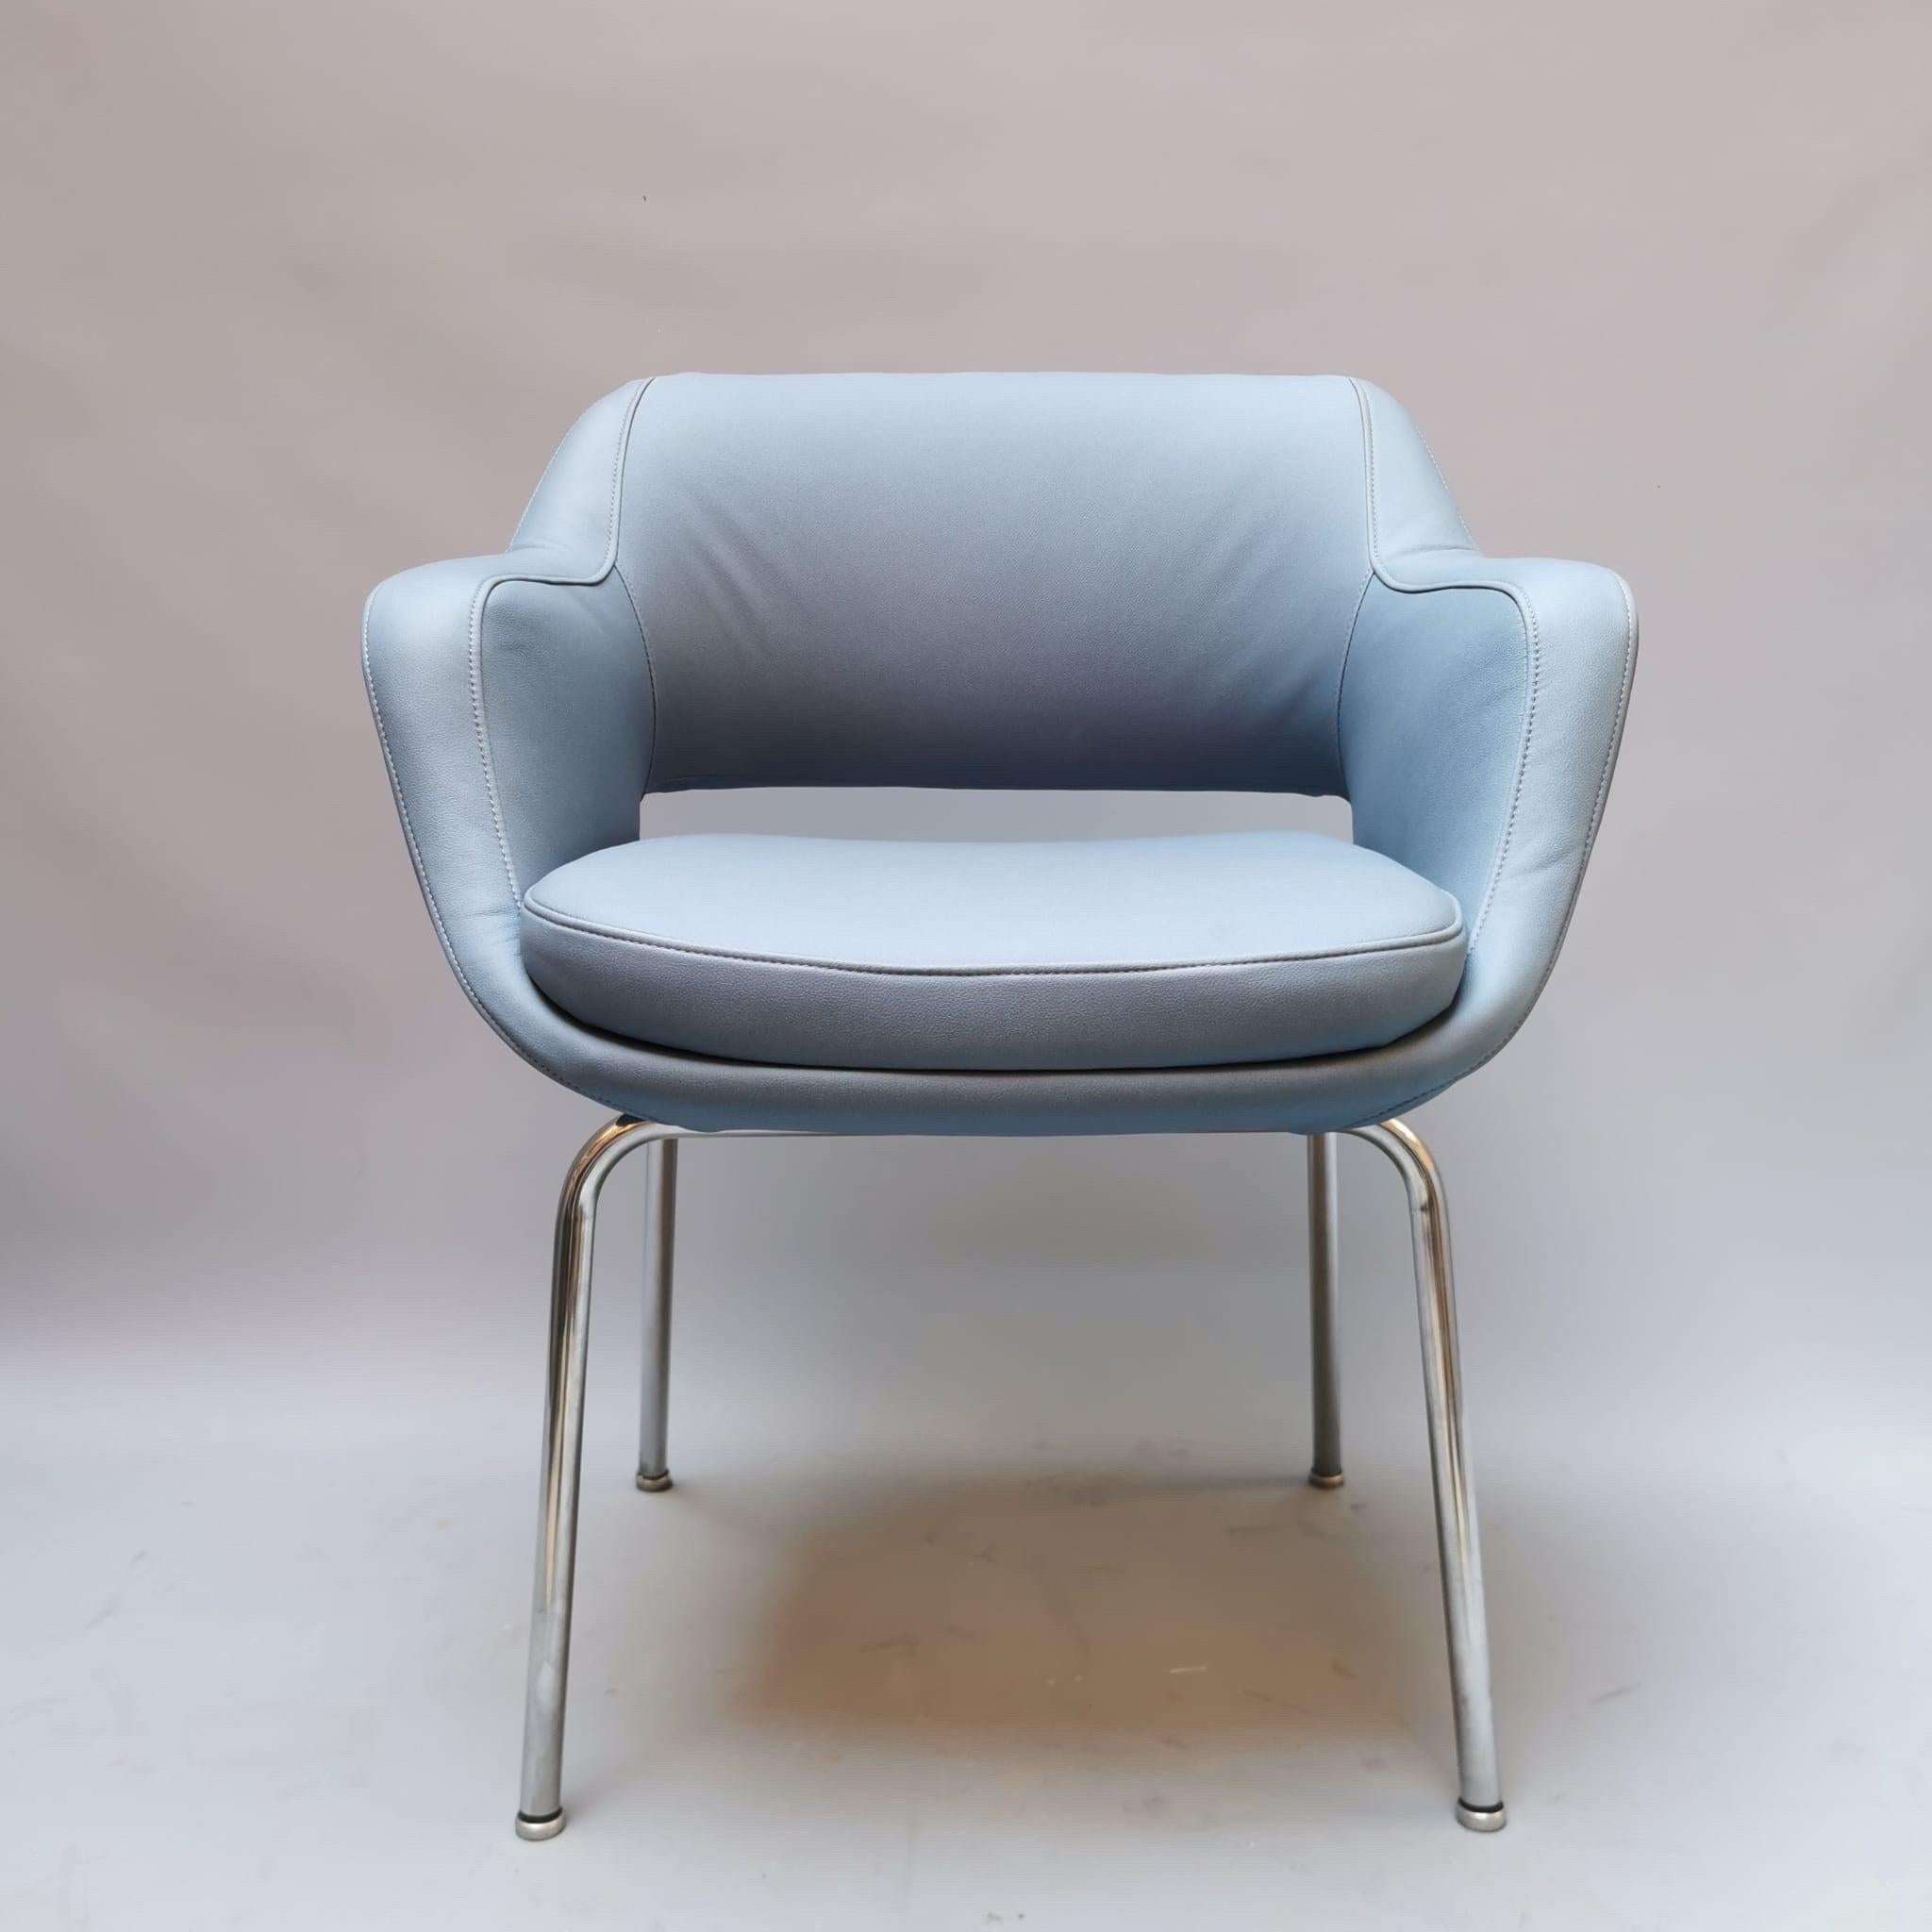 Set of 6 Kilta Armchairs, design by Olli Mannermaa for Cassina 1